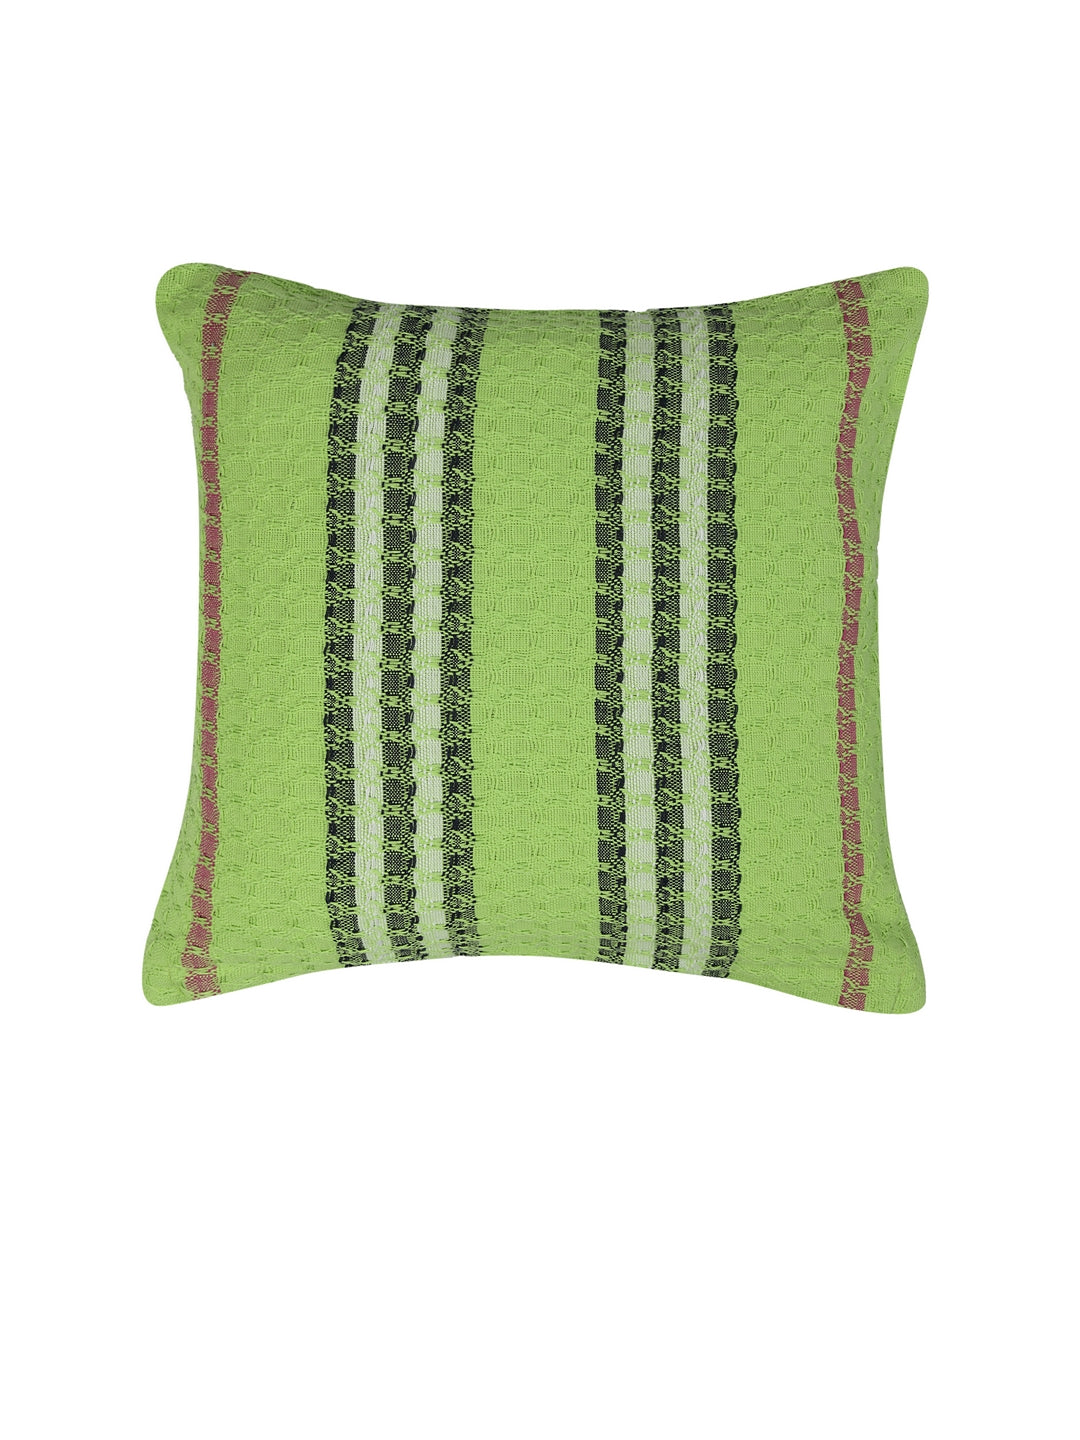 KLOTTHE Set of Five Green Poly Cotton Cushion Covers With Microfibre Fillers (40X40 cm)